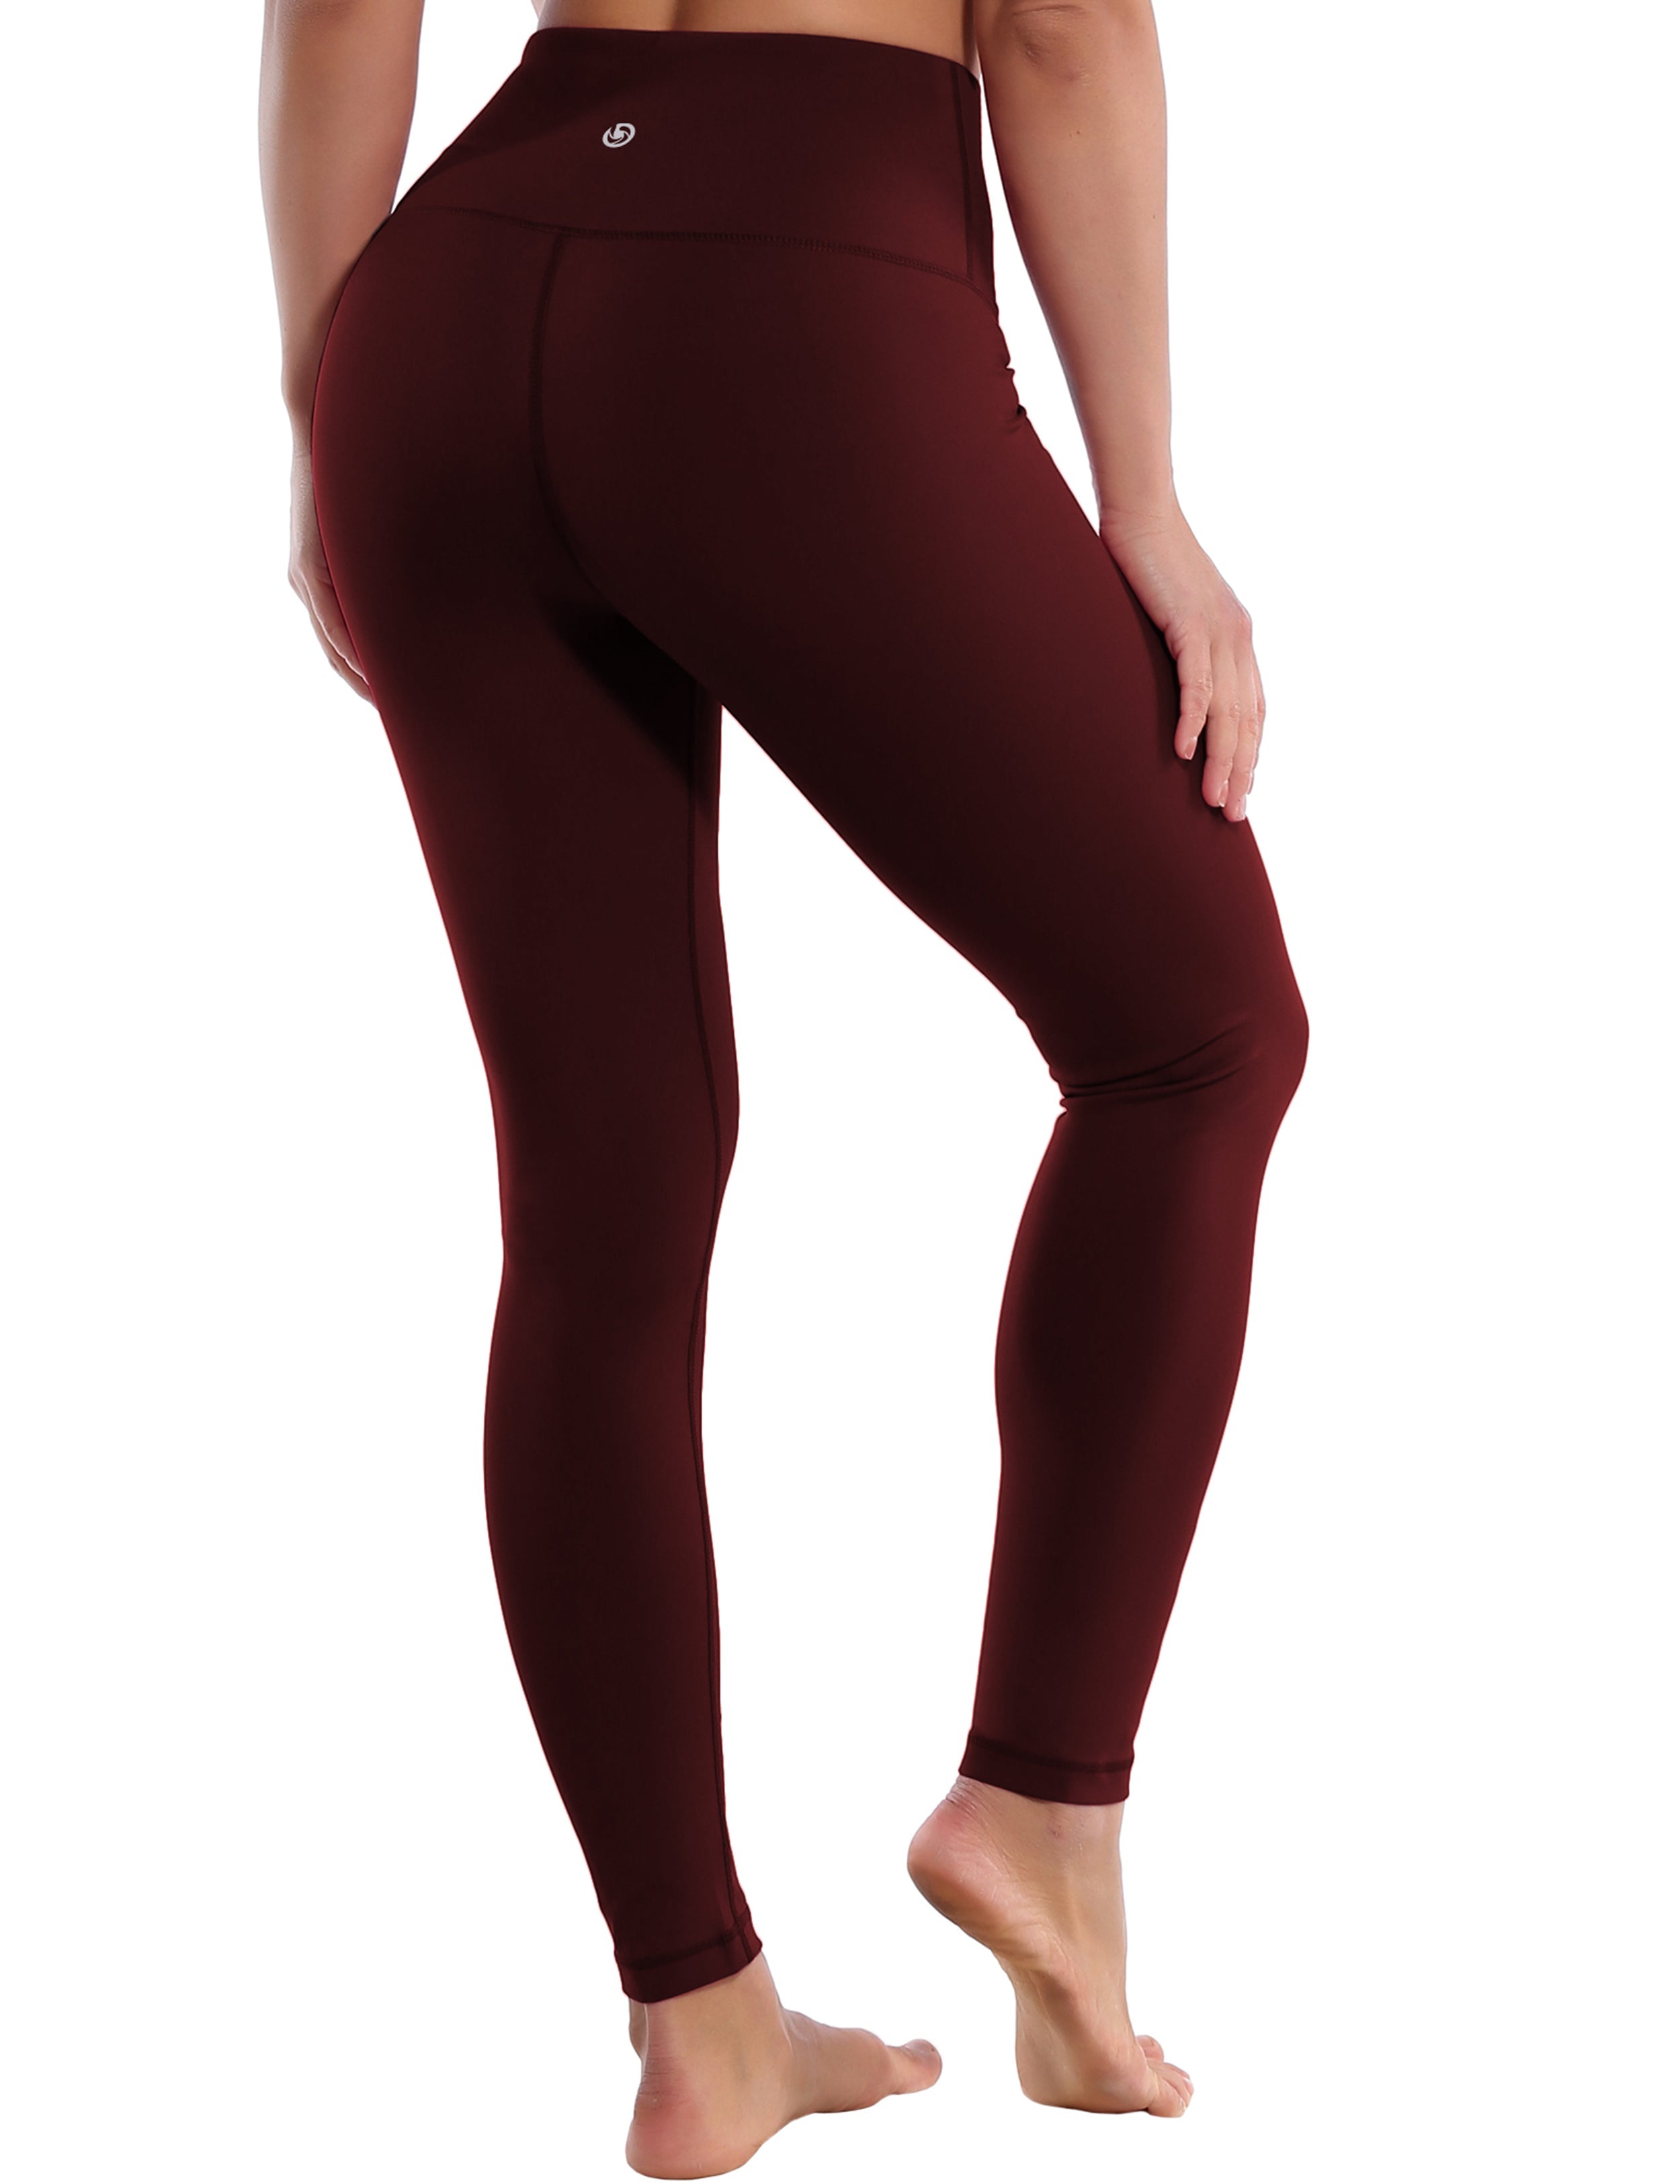 High Waist Running Pants cherryred 75%Nylon/25%Spandex Fabric doesn't attract lint easily 4-way stretch No see-through Moisture-wicking Tummy control Inner pocket Four lengths